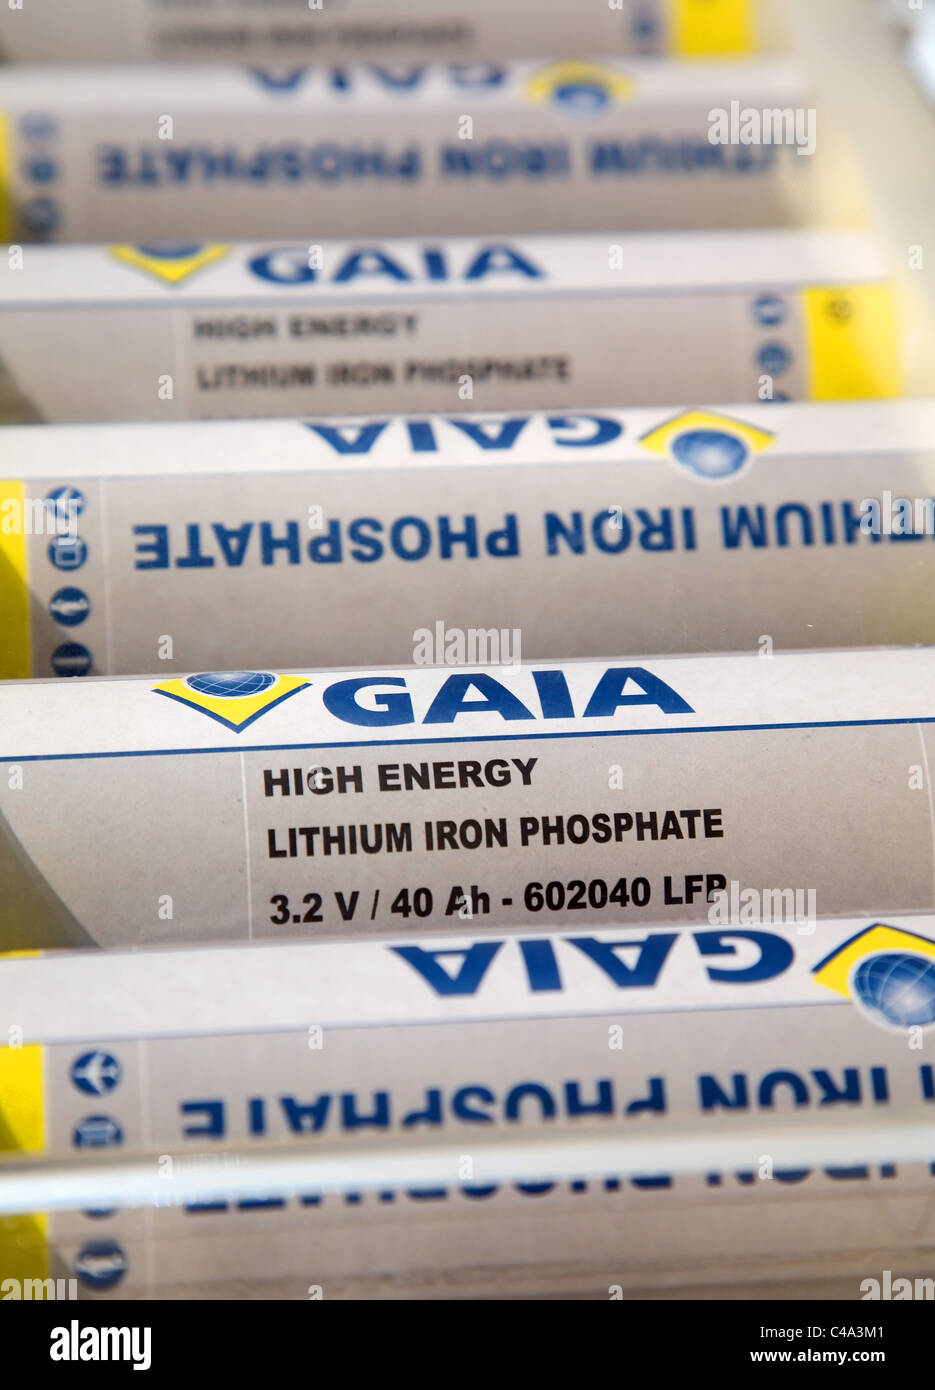 GAIA High Energy Lithium Iron Phosphate Battery Cells Stock Photo